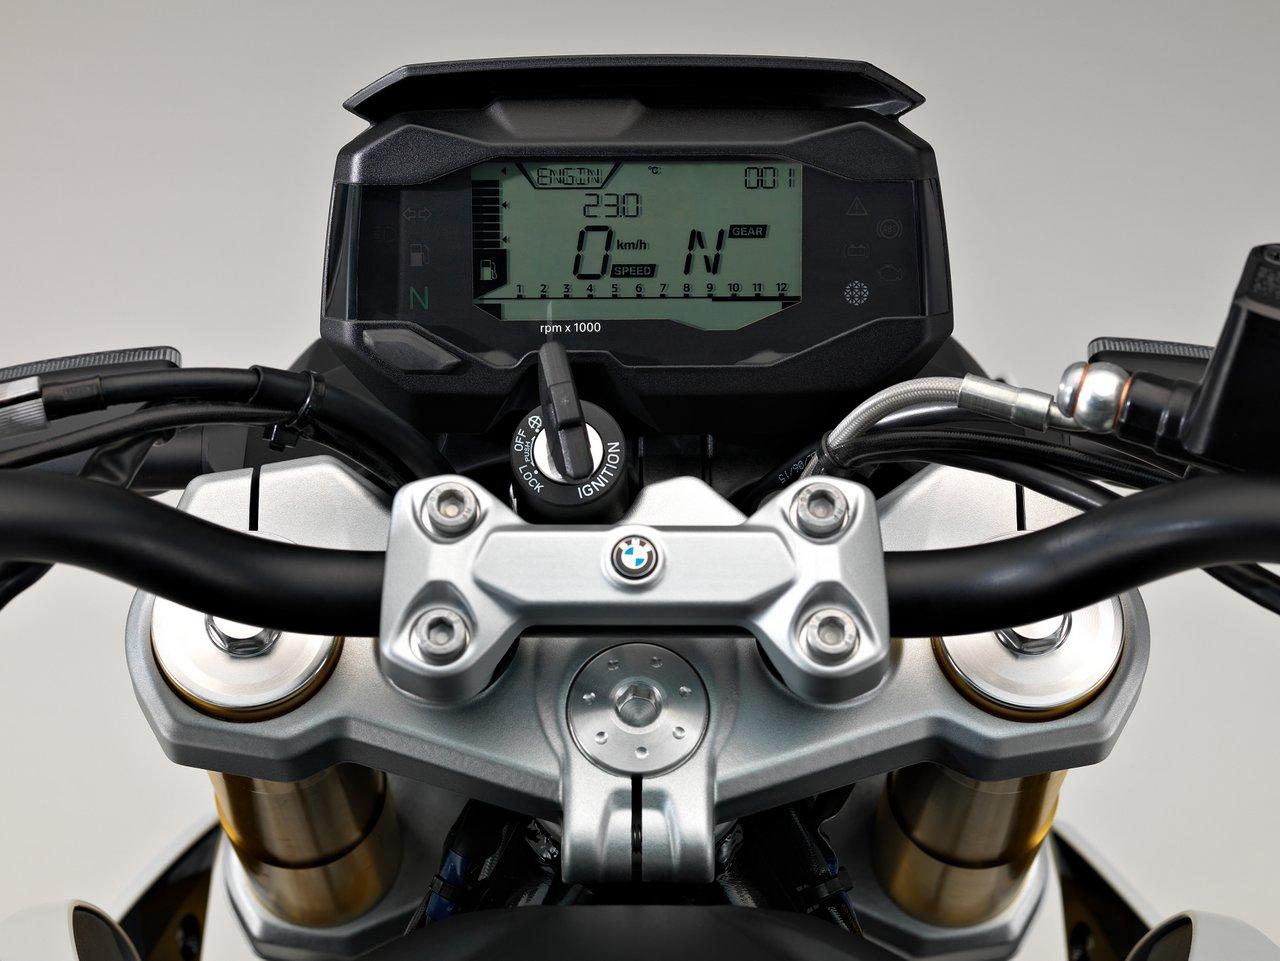 New Image Show The Made In India BMW G310R Up Close